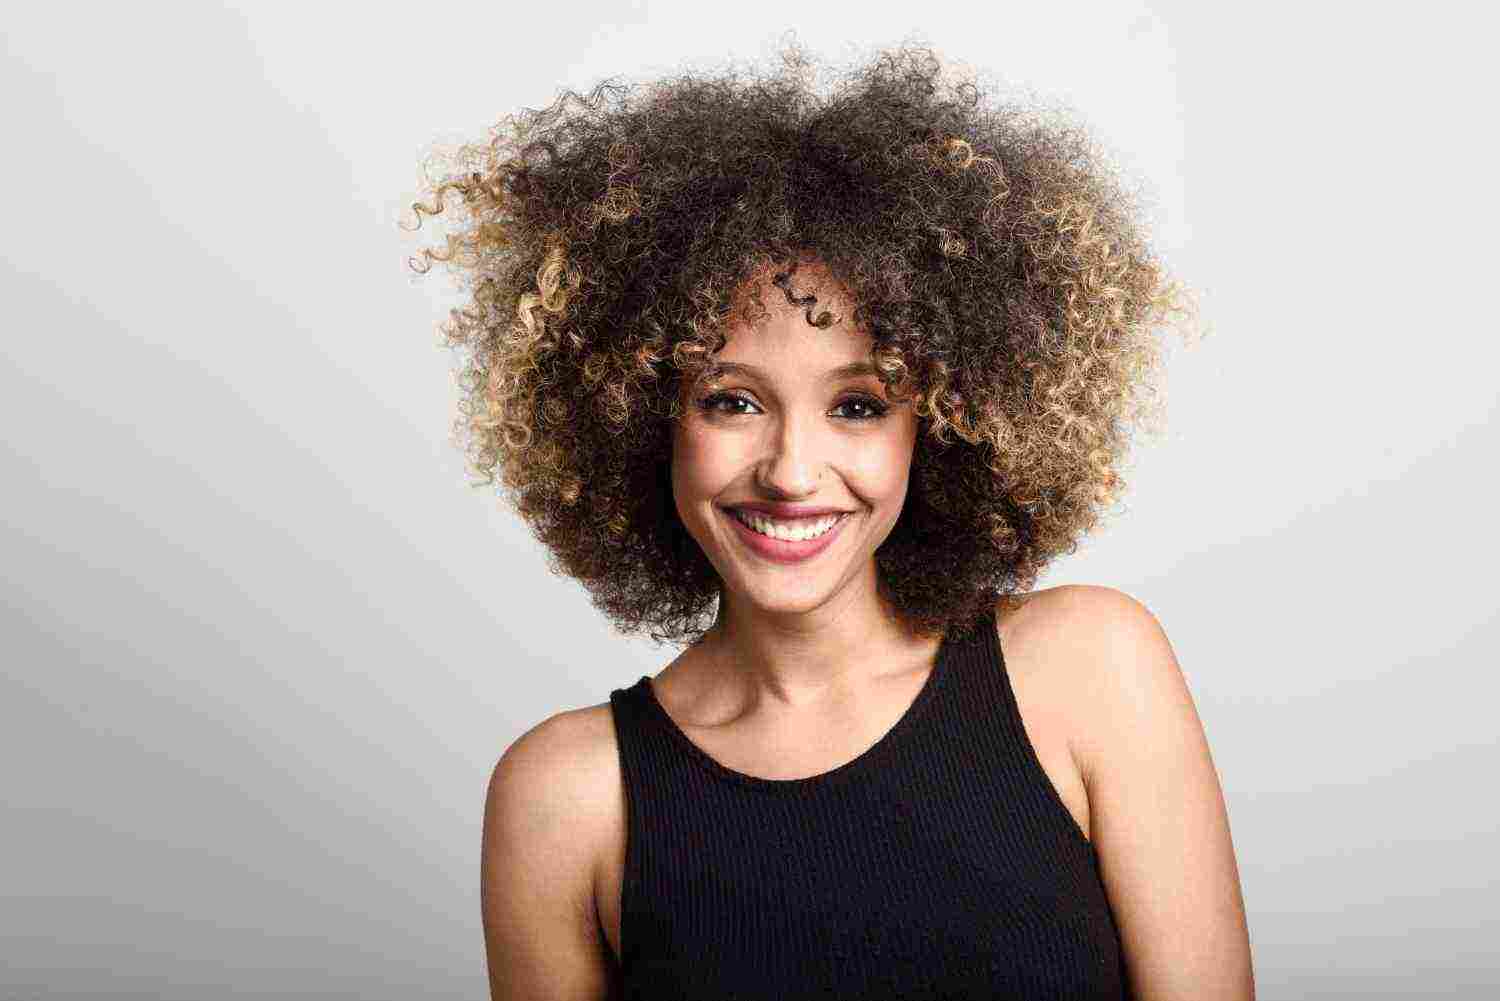 woman smiling face with curly hair